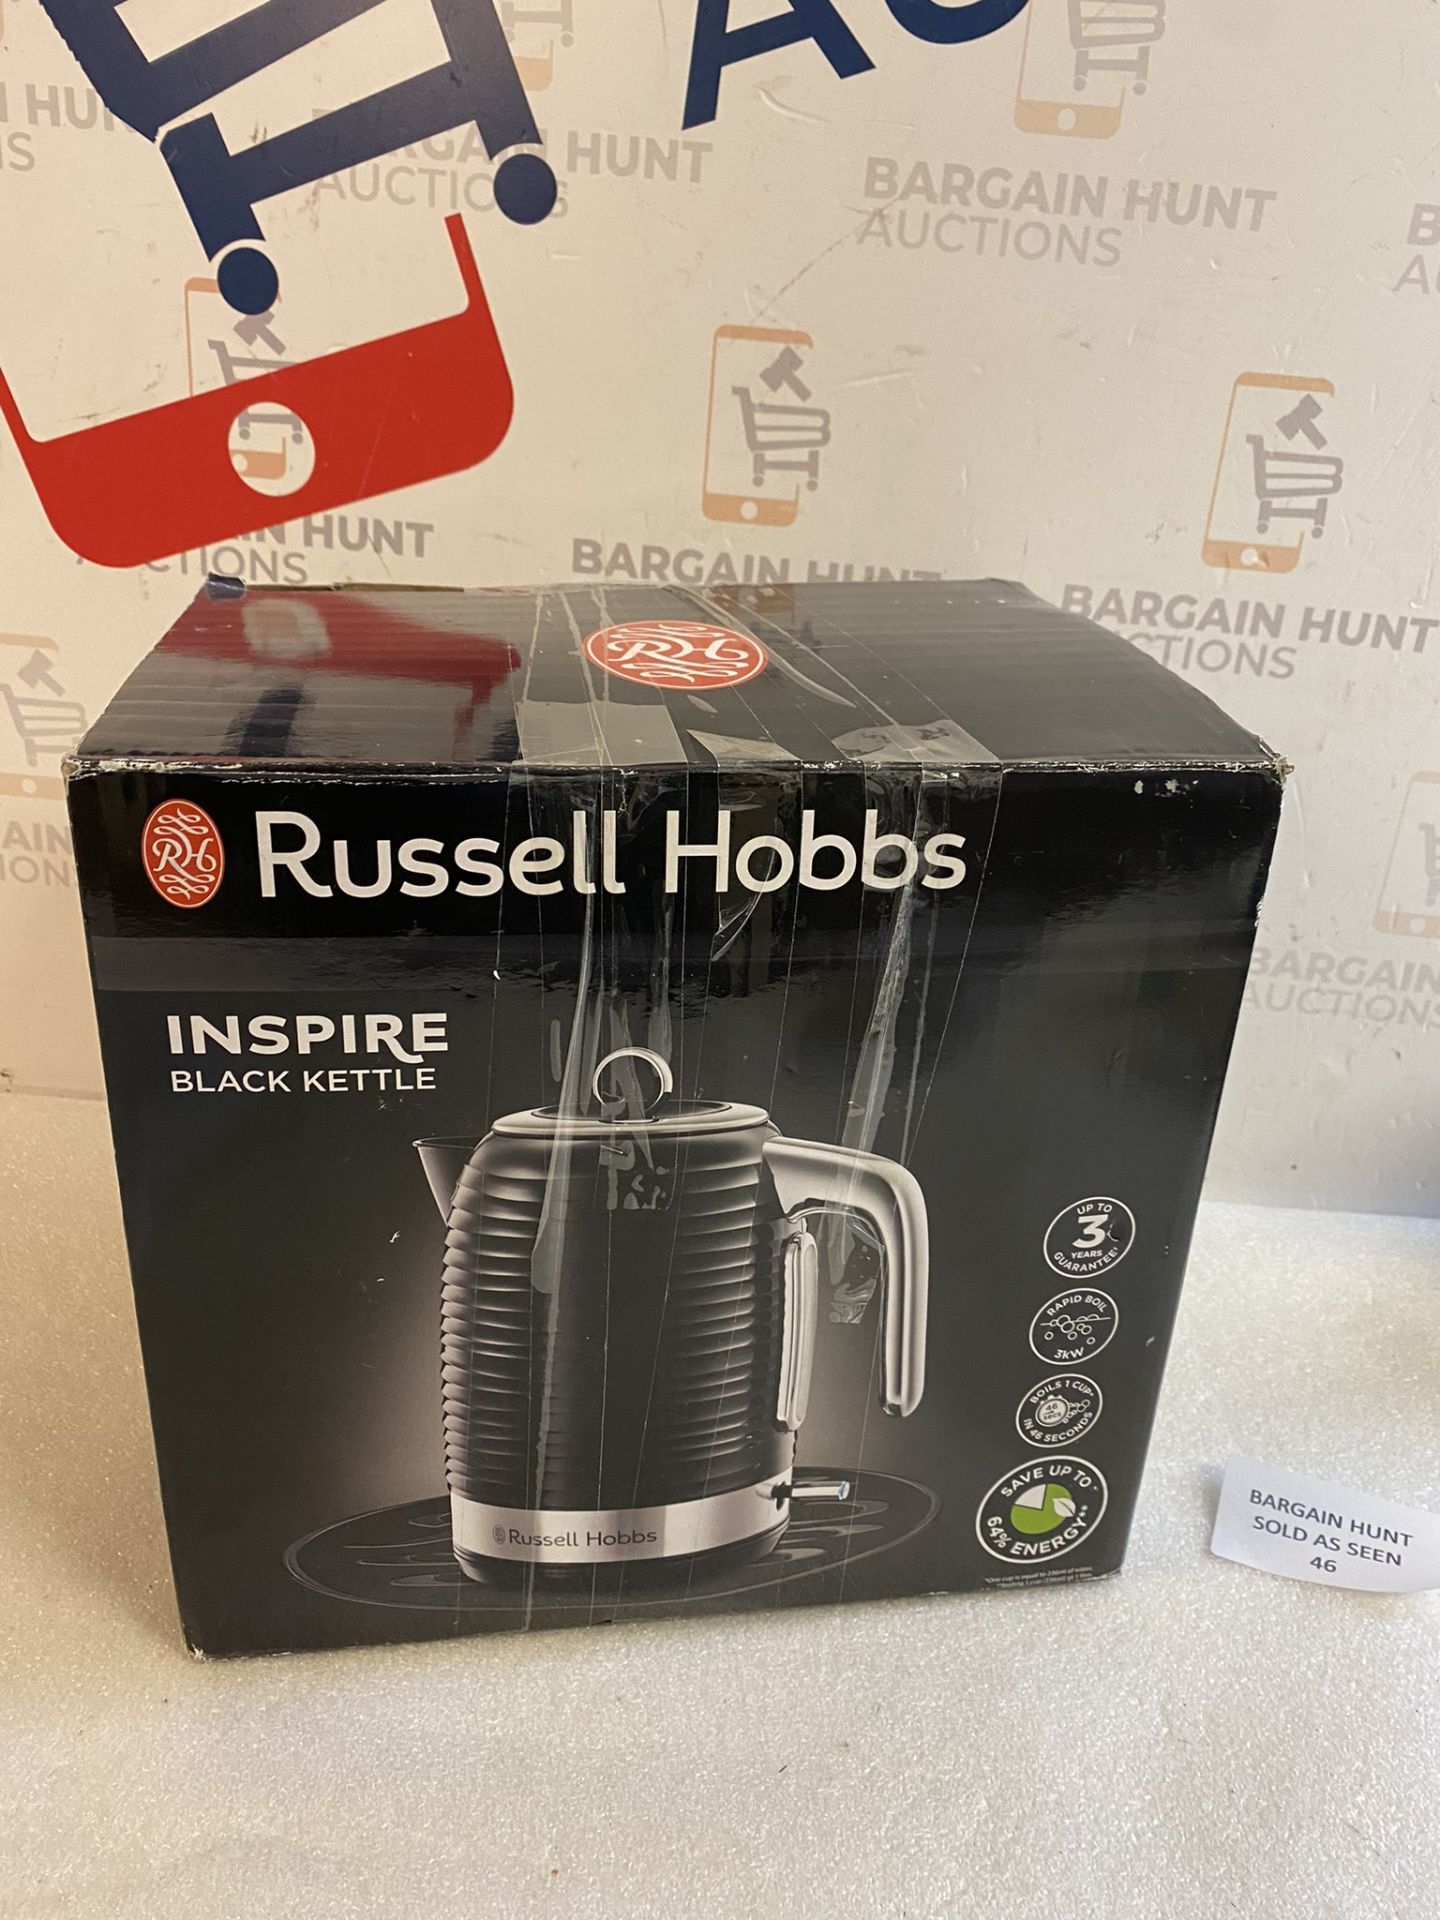 Russell Hobbs 24361 Inspire Electric Fast Boil Kettle RRP £34.99 - Image 2 of 2